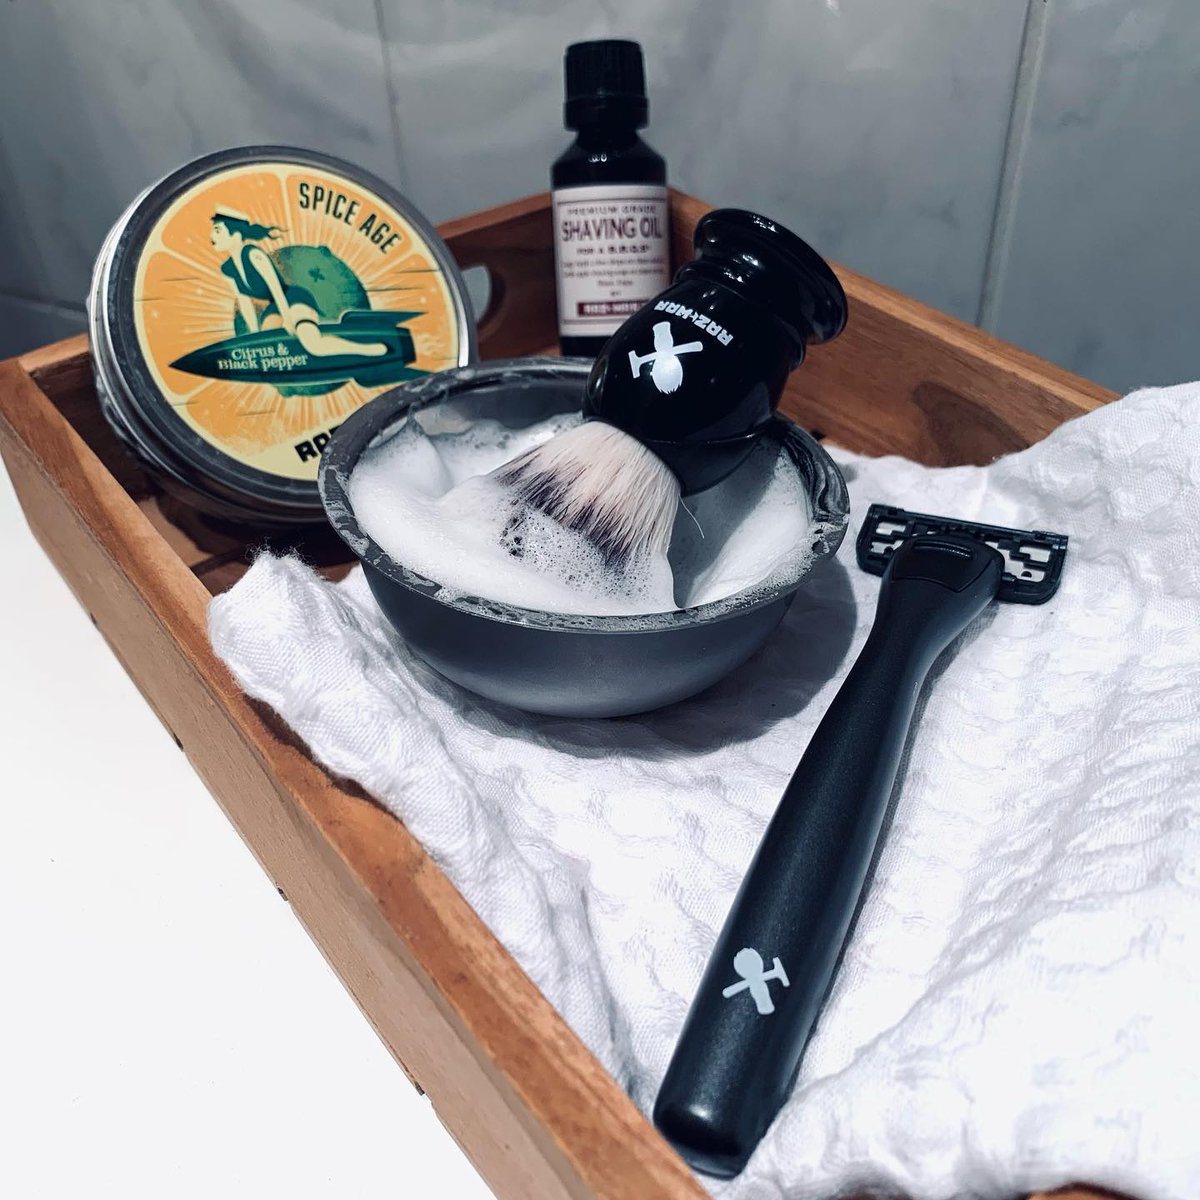 Barber at home style. Just look at this lather. 

#shaving #naturalshaving #barber #wetshaving #newrazor